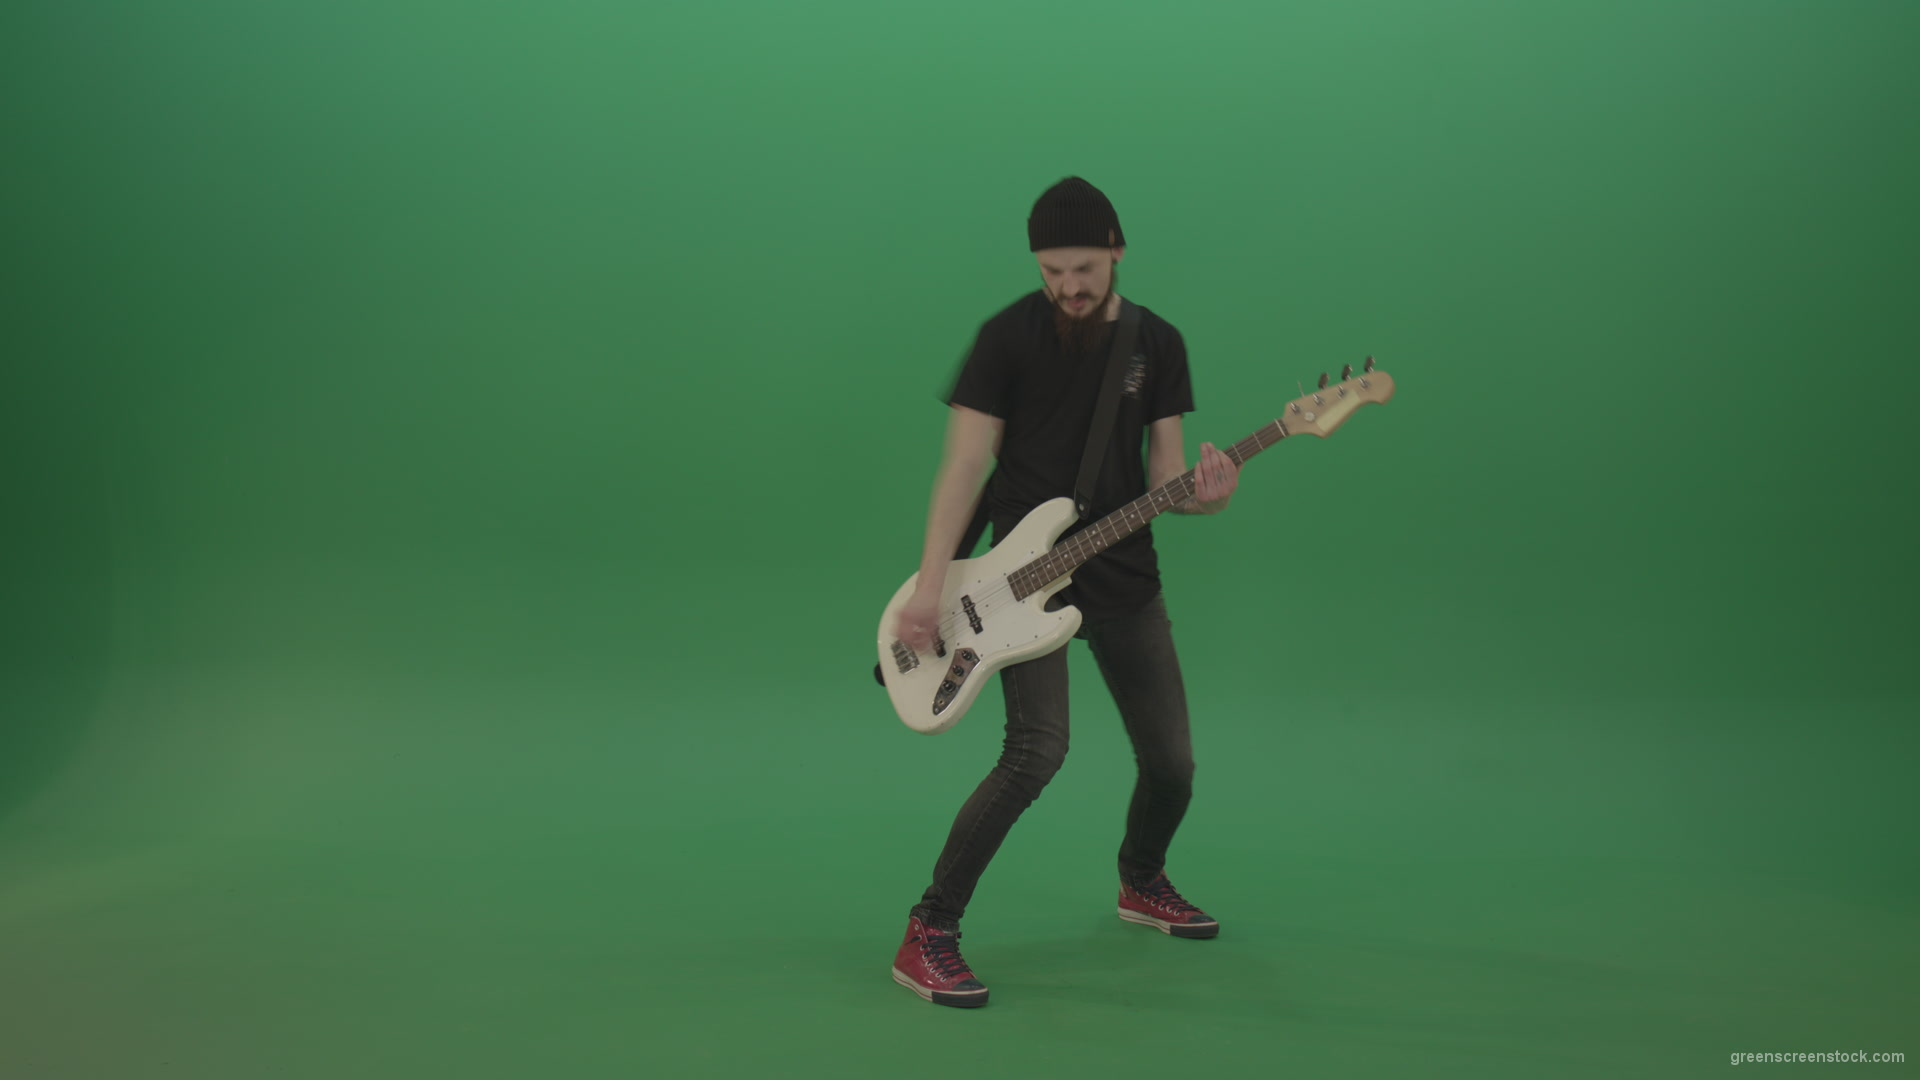 Man-play-music-instrument-bass-guitar-isolated-on-green-screen_008 Green Screen Stock